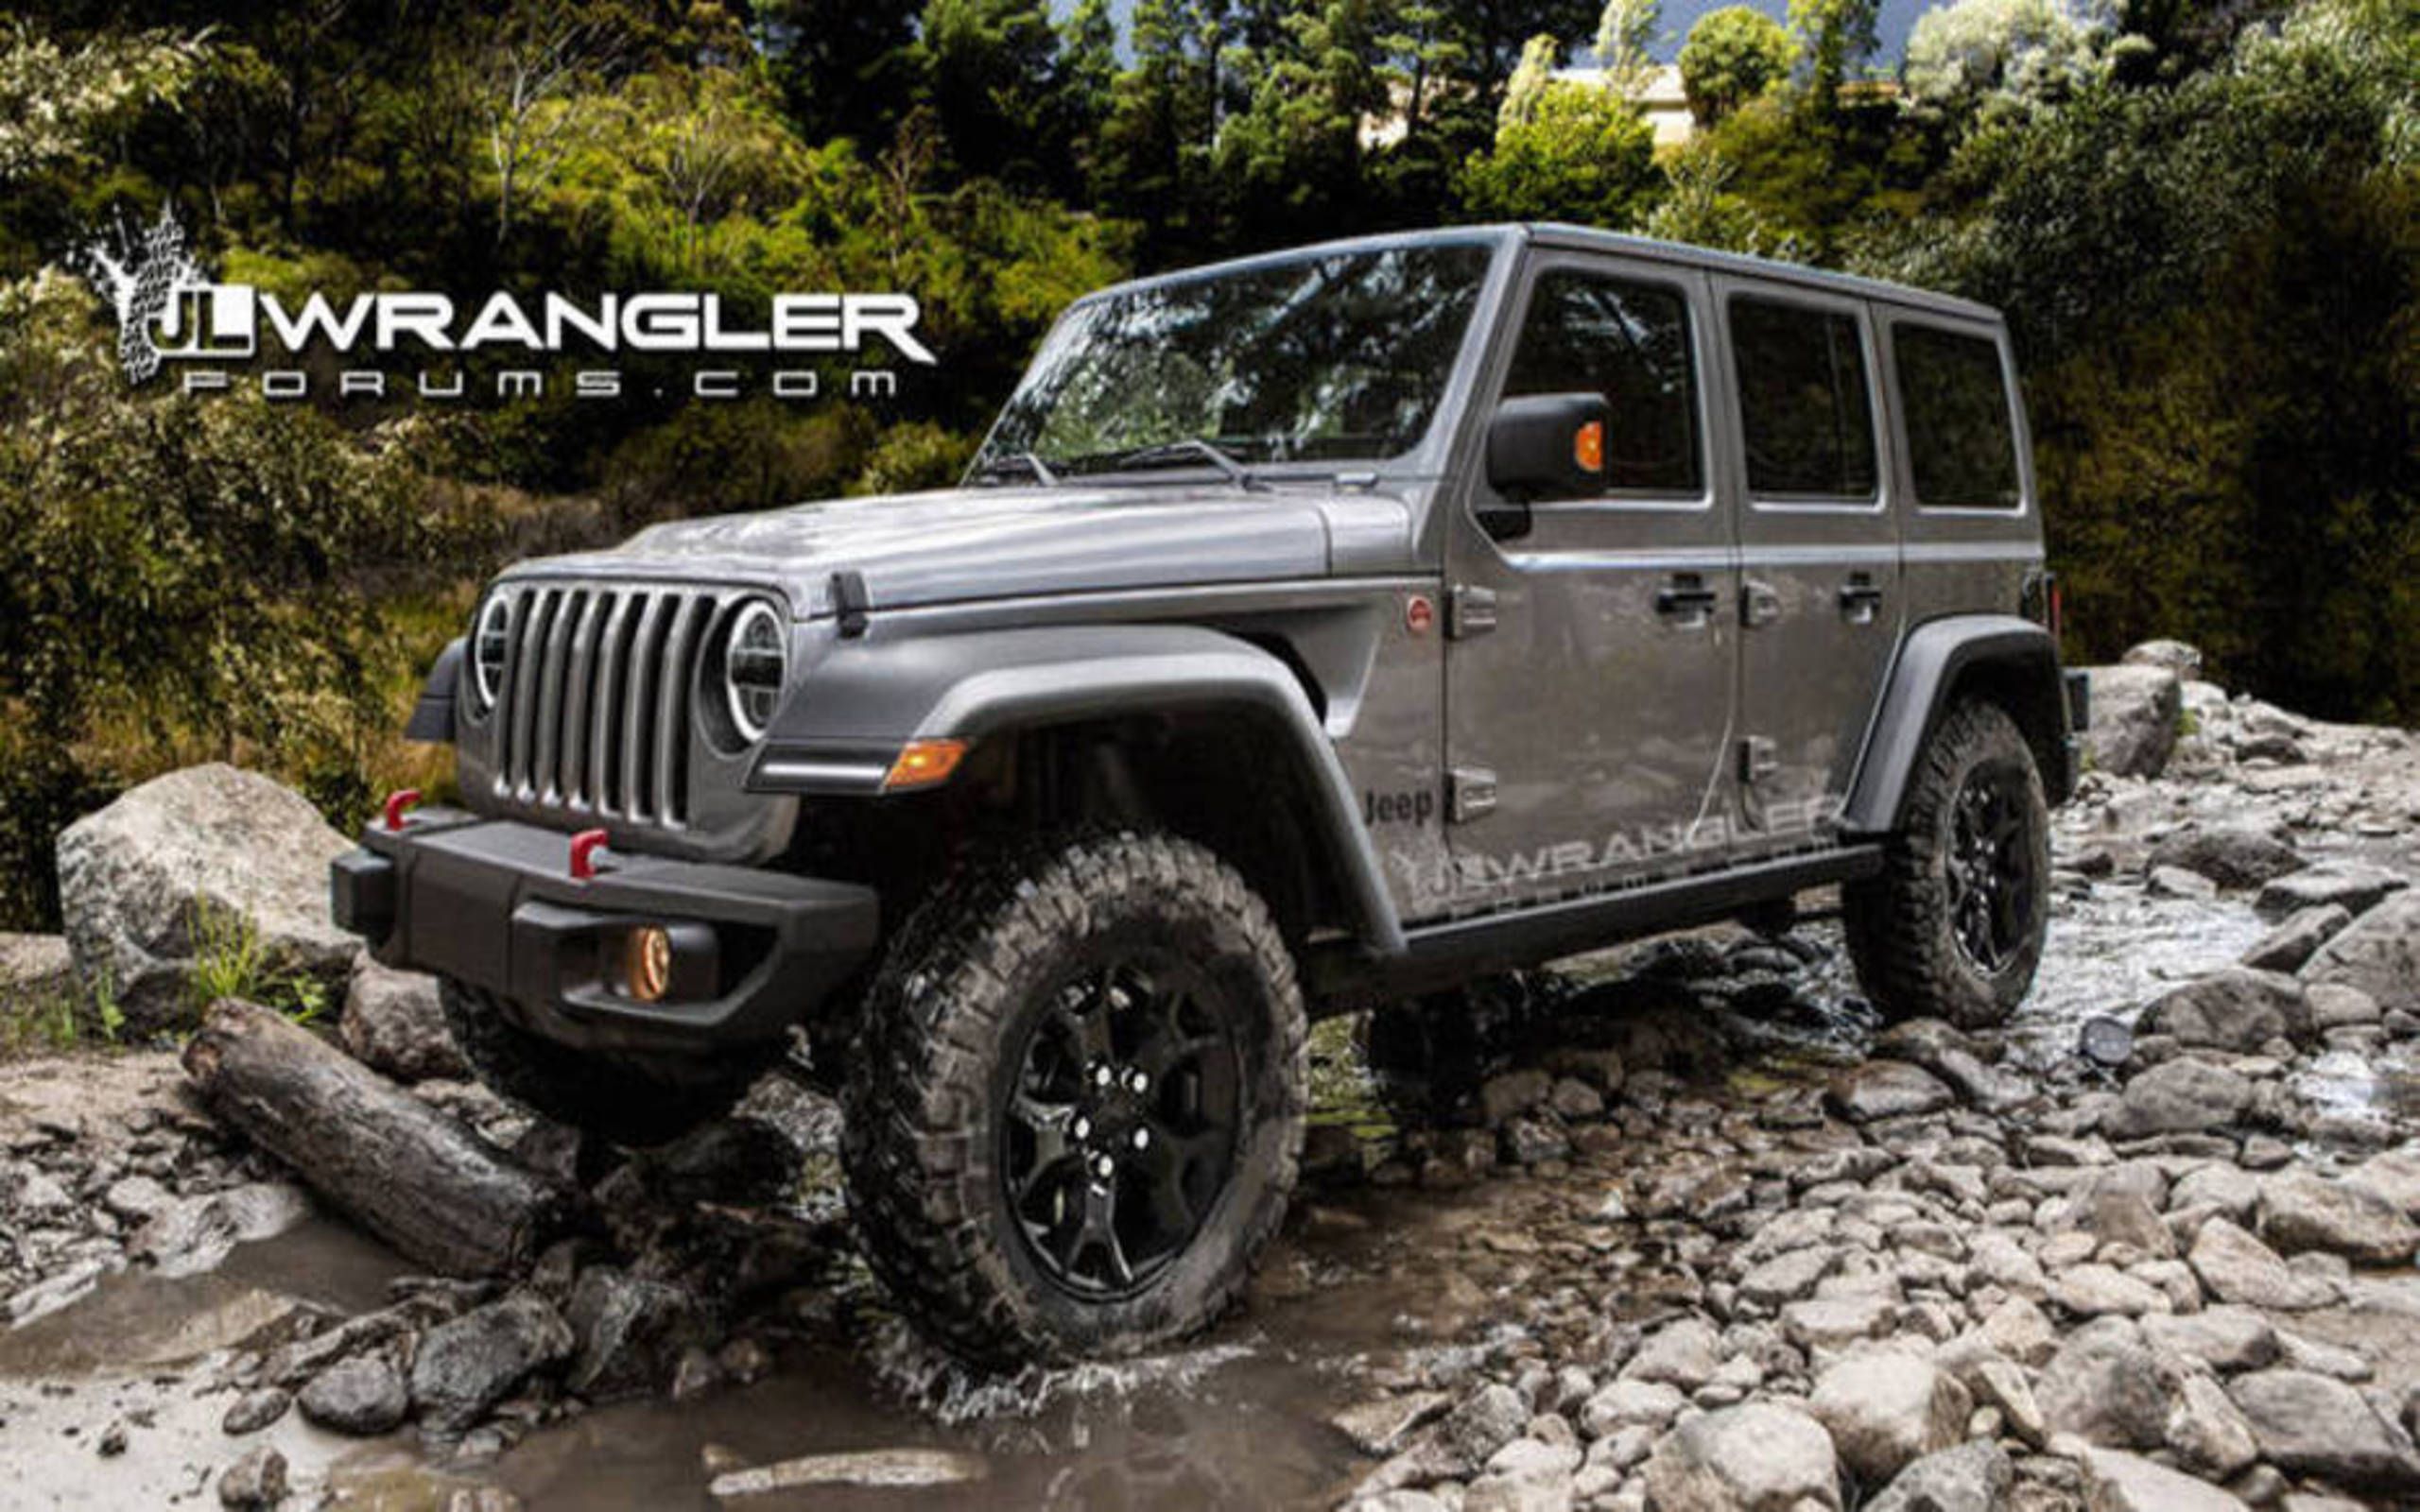 Next-gen Jeep Wrangler: 7 things we expect to see